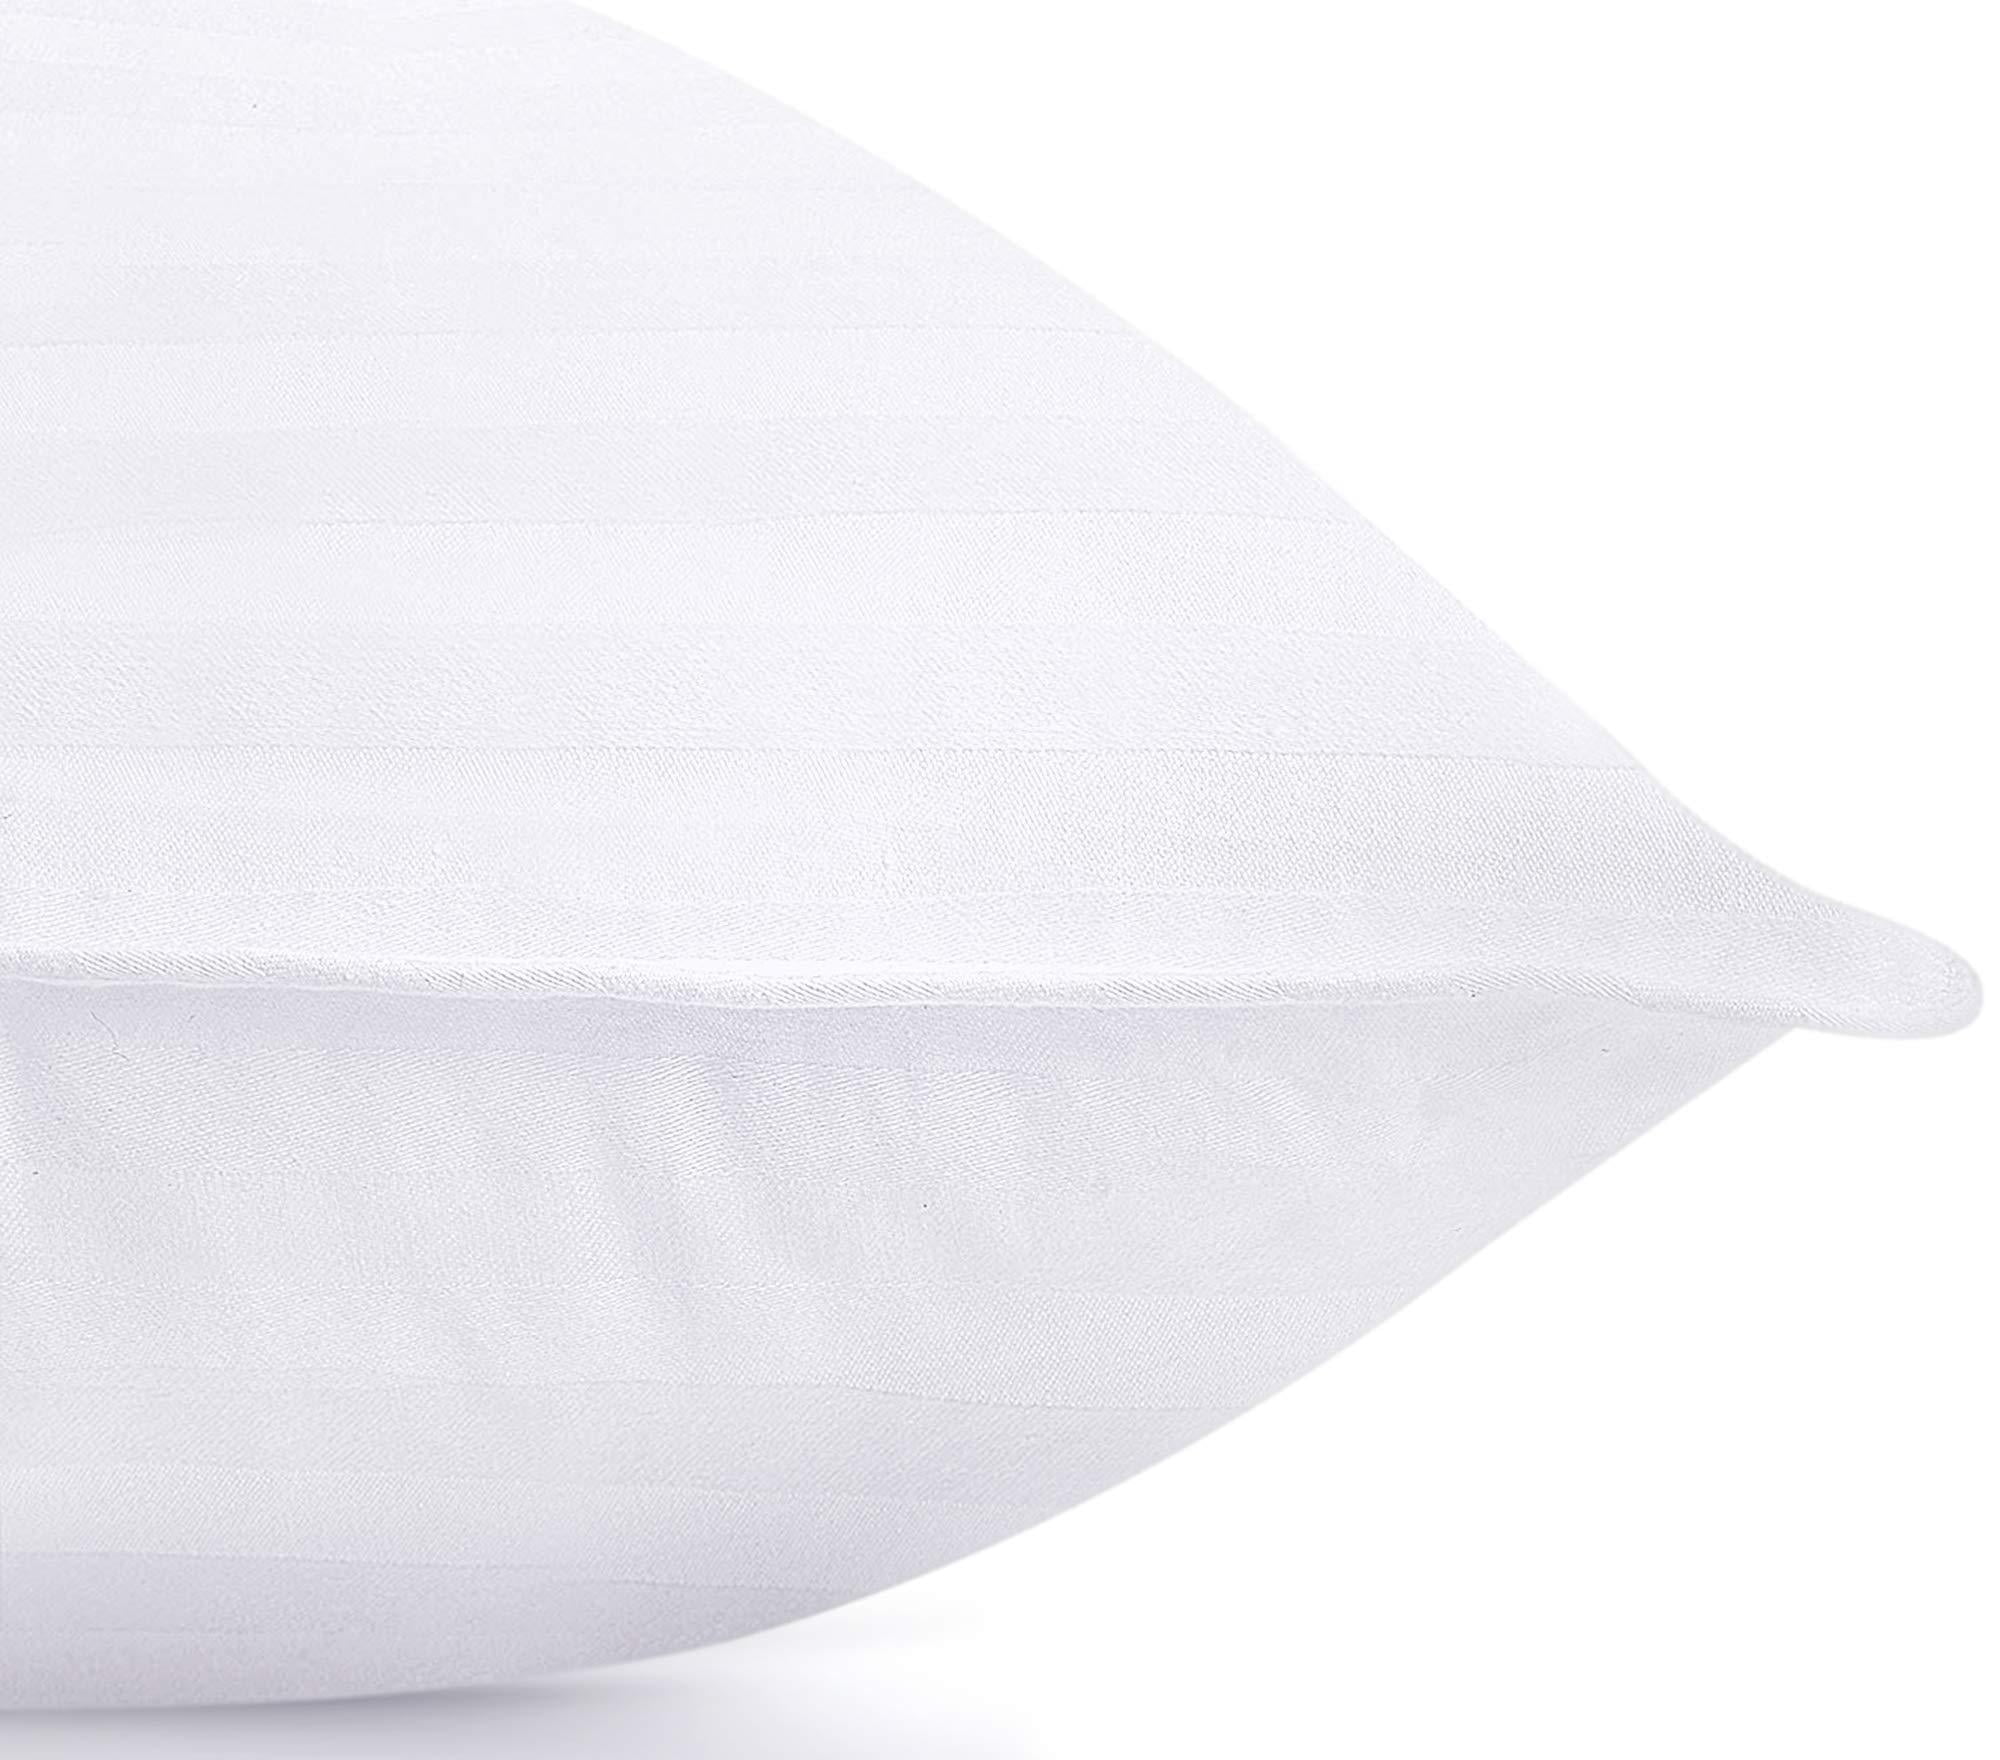 Utopia Bedding Bed Pillows for Sleeping (Beige), Standard Size, Set of 2,  Hotel Pillows, Cooling Pillows for Side, Back or Stomach Sleepers